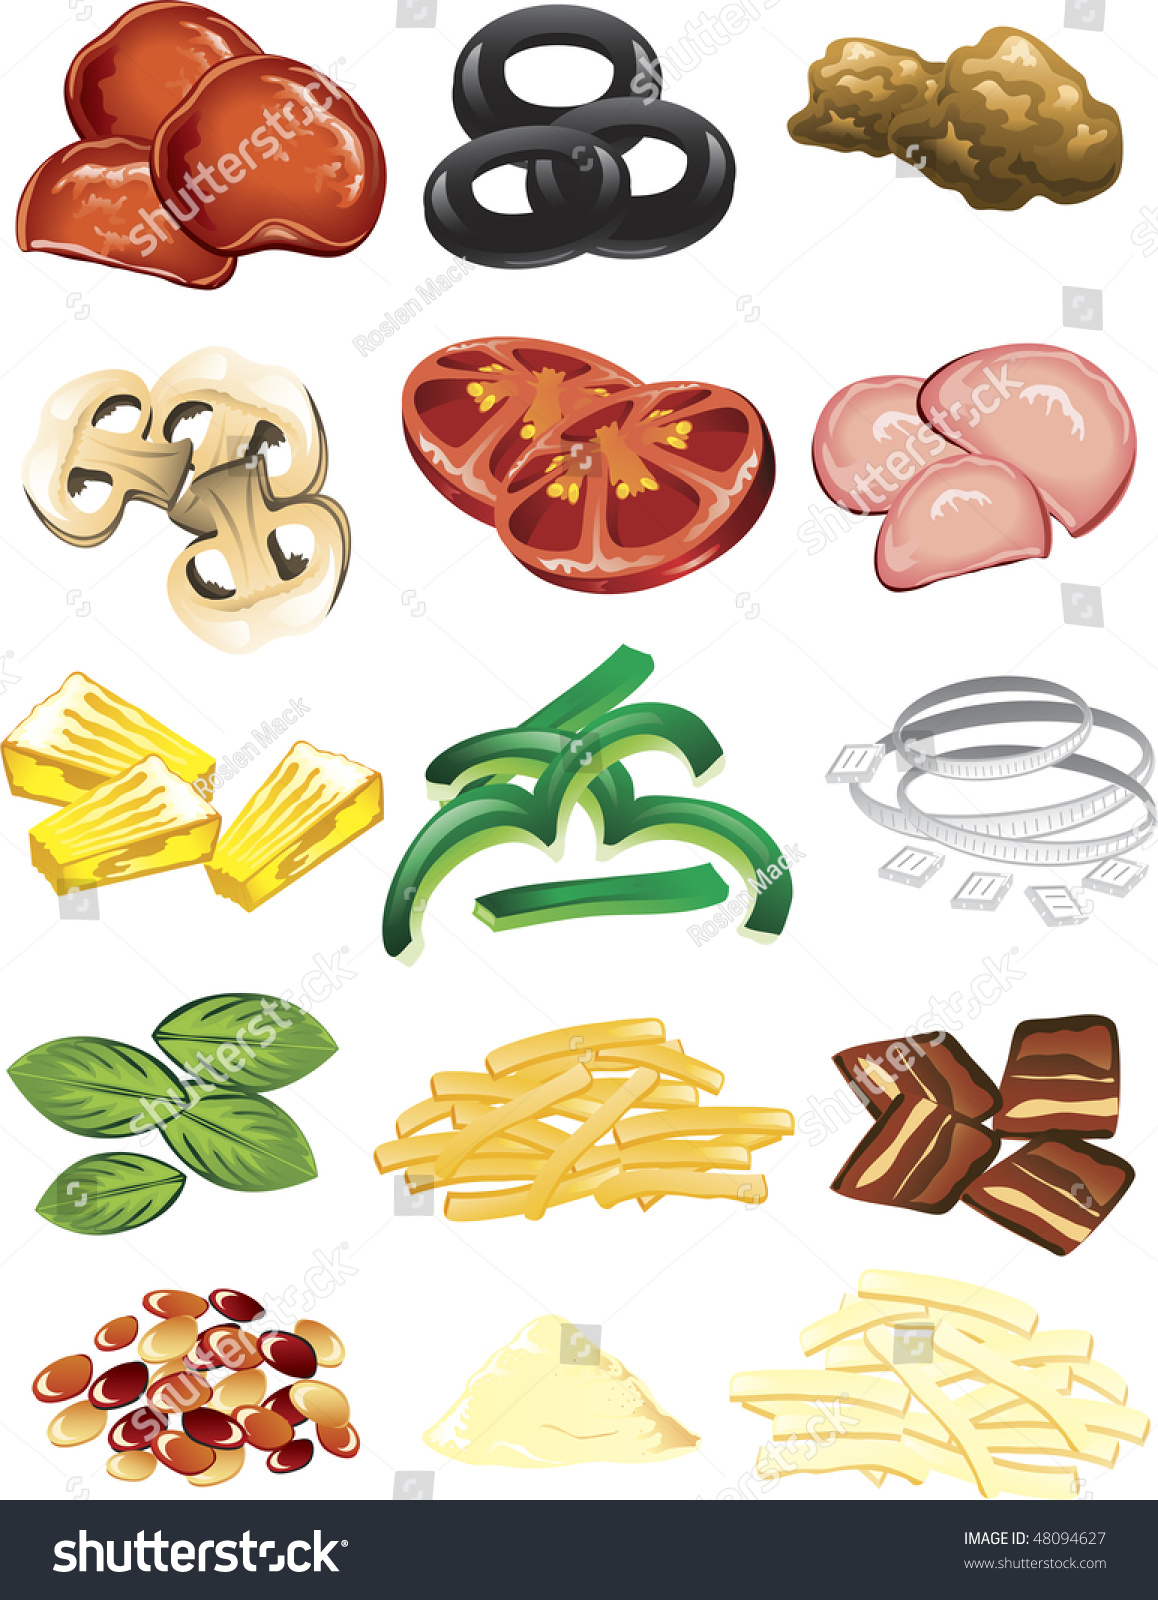 pizza toppings clipart - photo #28